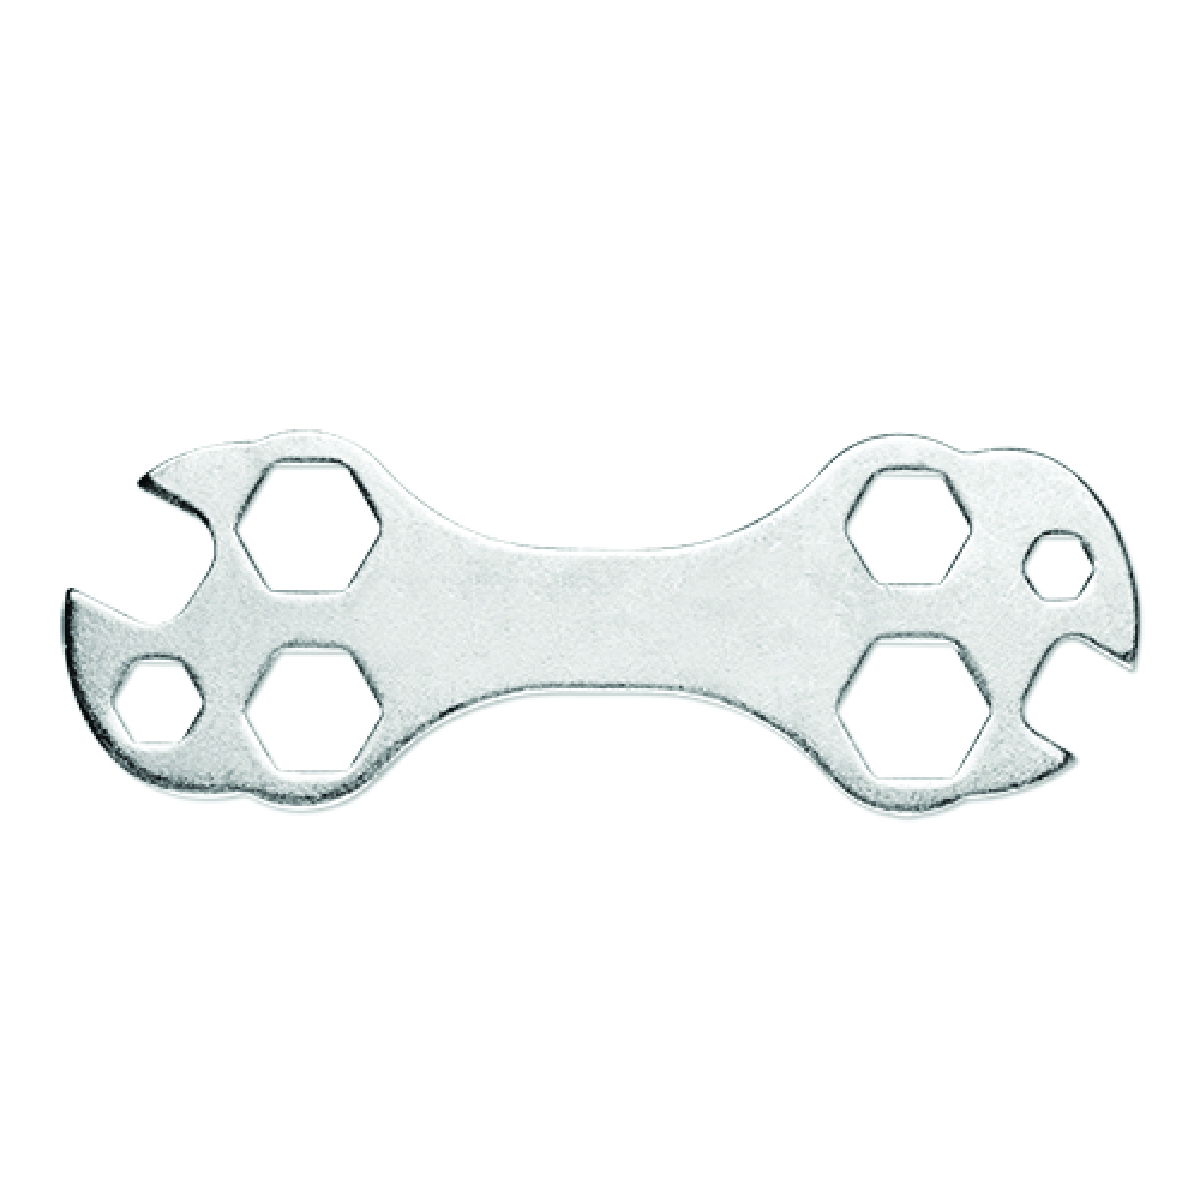 Silver Multi Wrench Tool